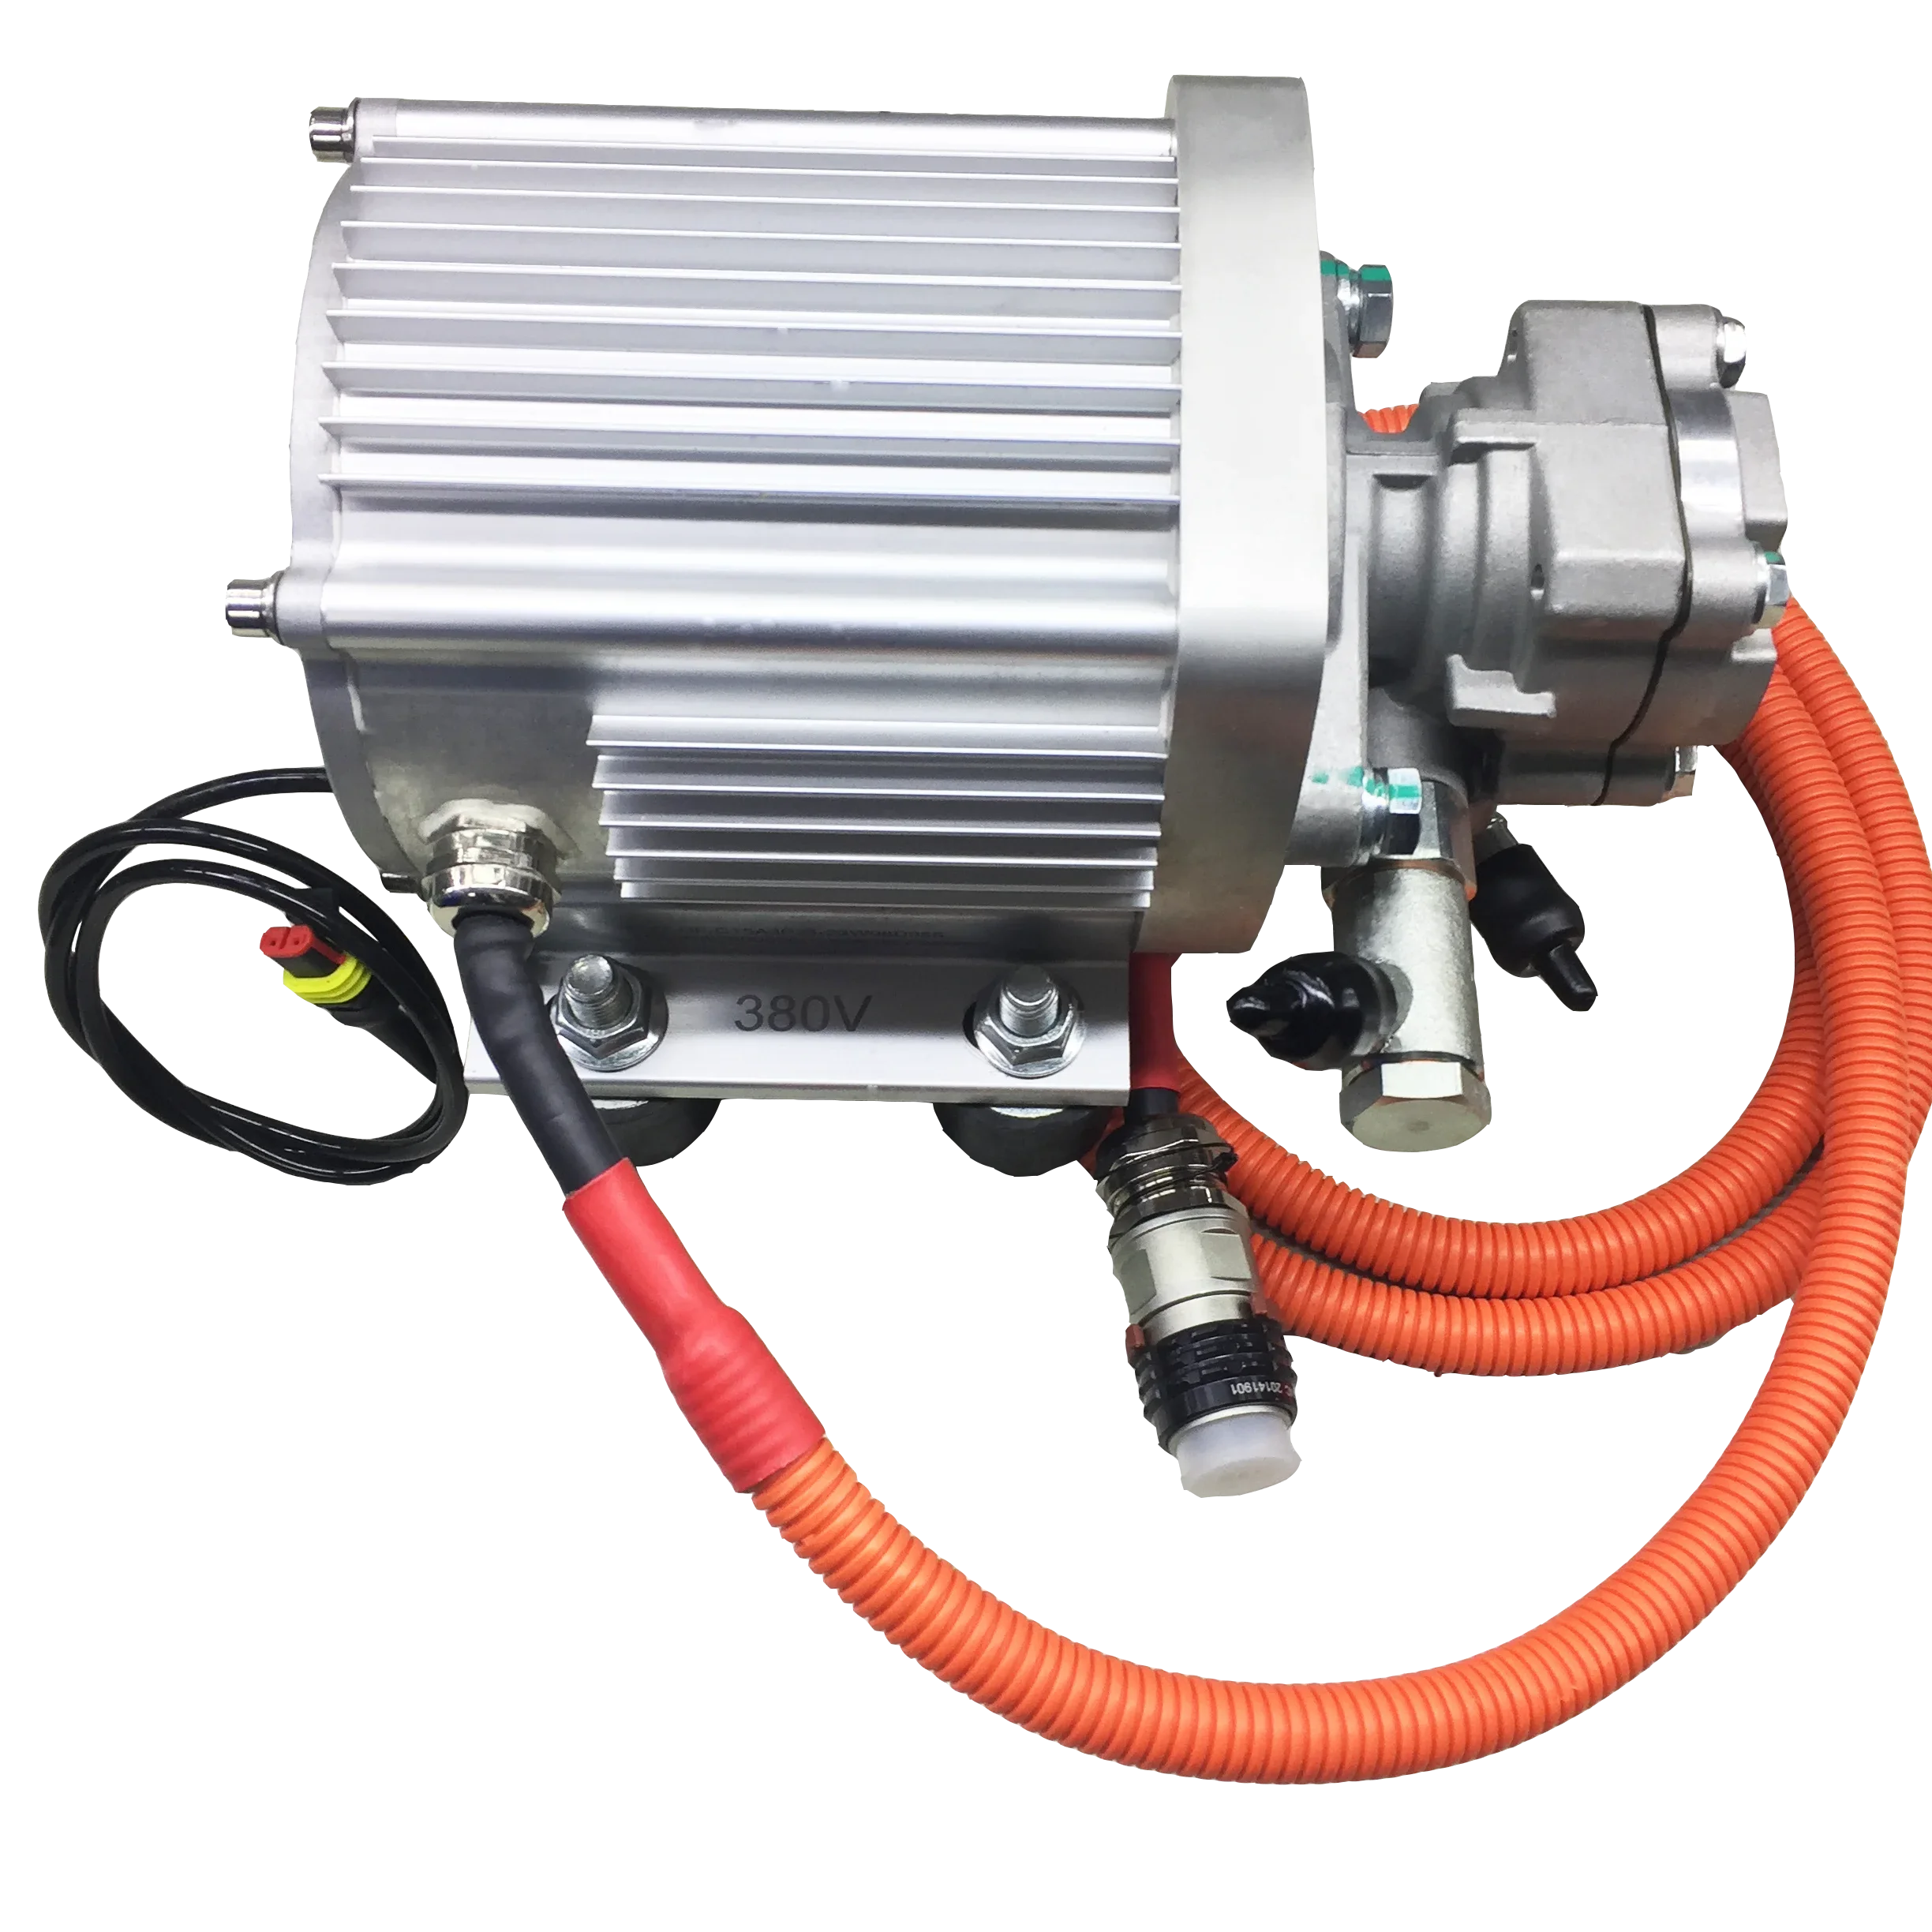 

Hot sale OEM/ODM Brand new 310VDC 540VDC Electric hydraulic power steering pump for 5-16M bus and truck custom